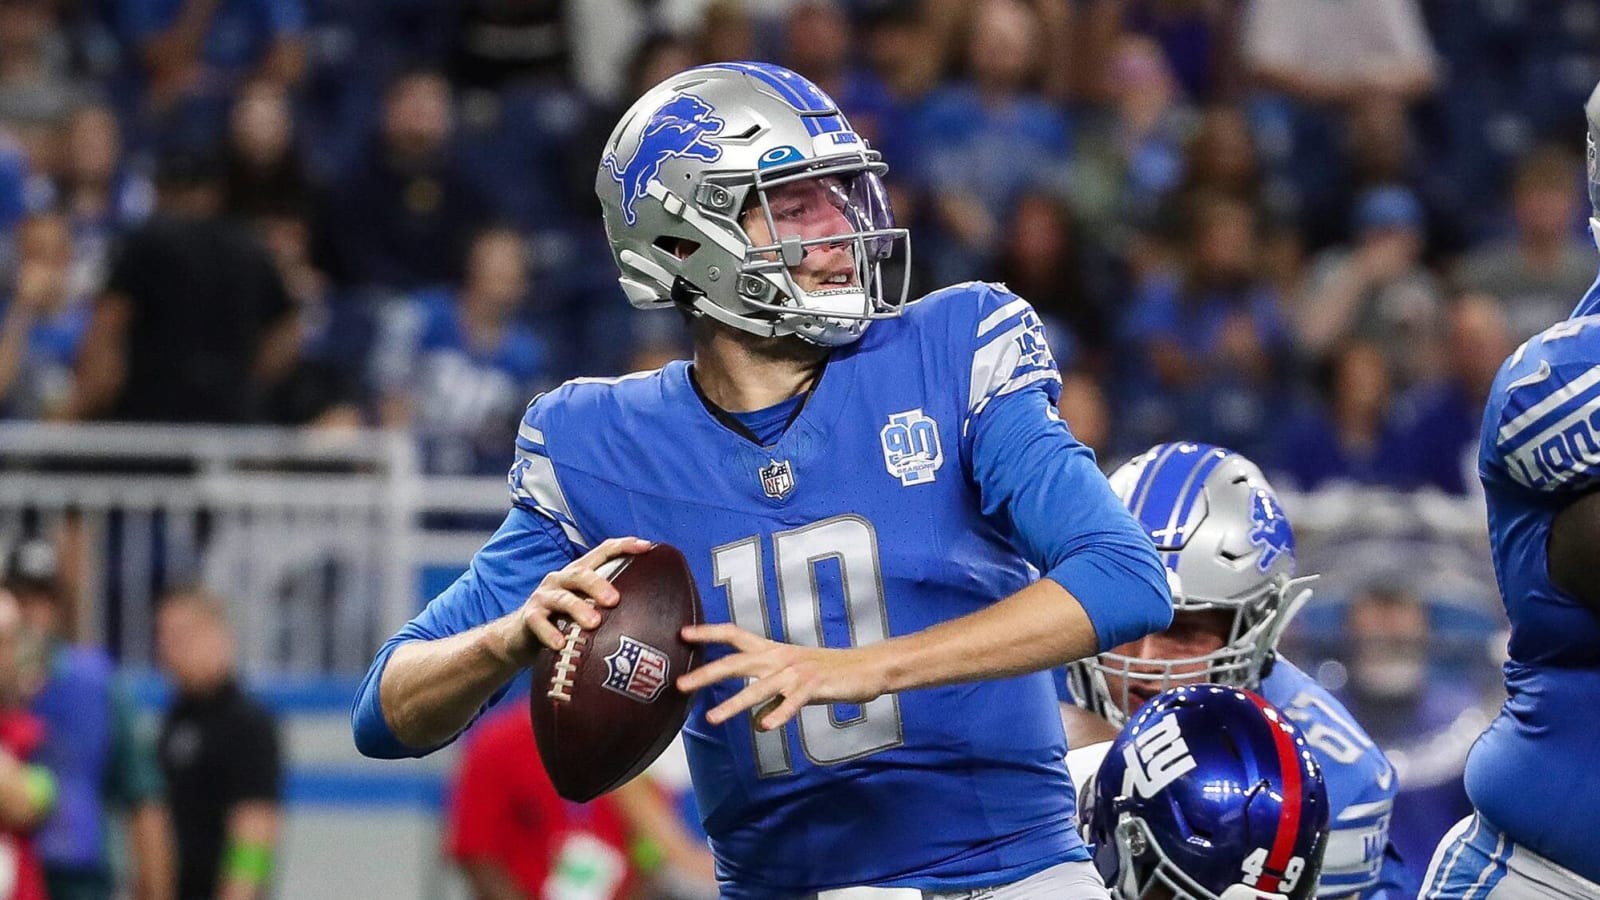 Takeaways from Detroit Lions 21-16 Victory against New York Giants